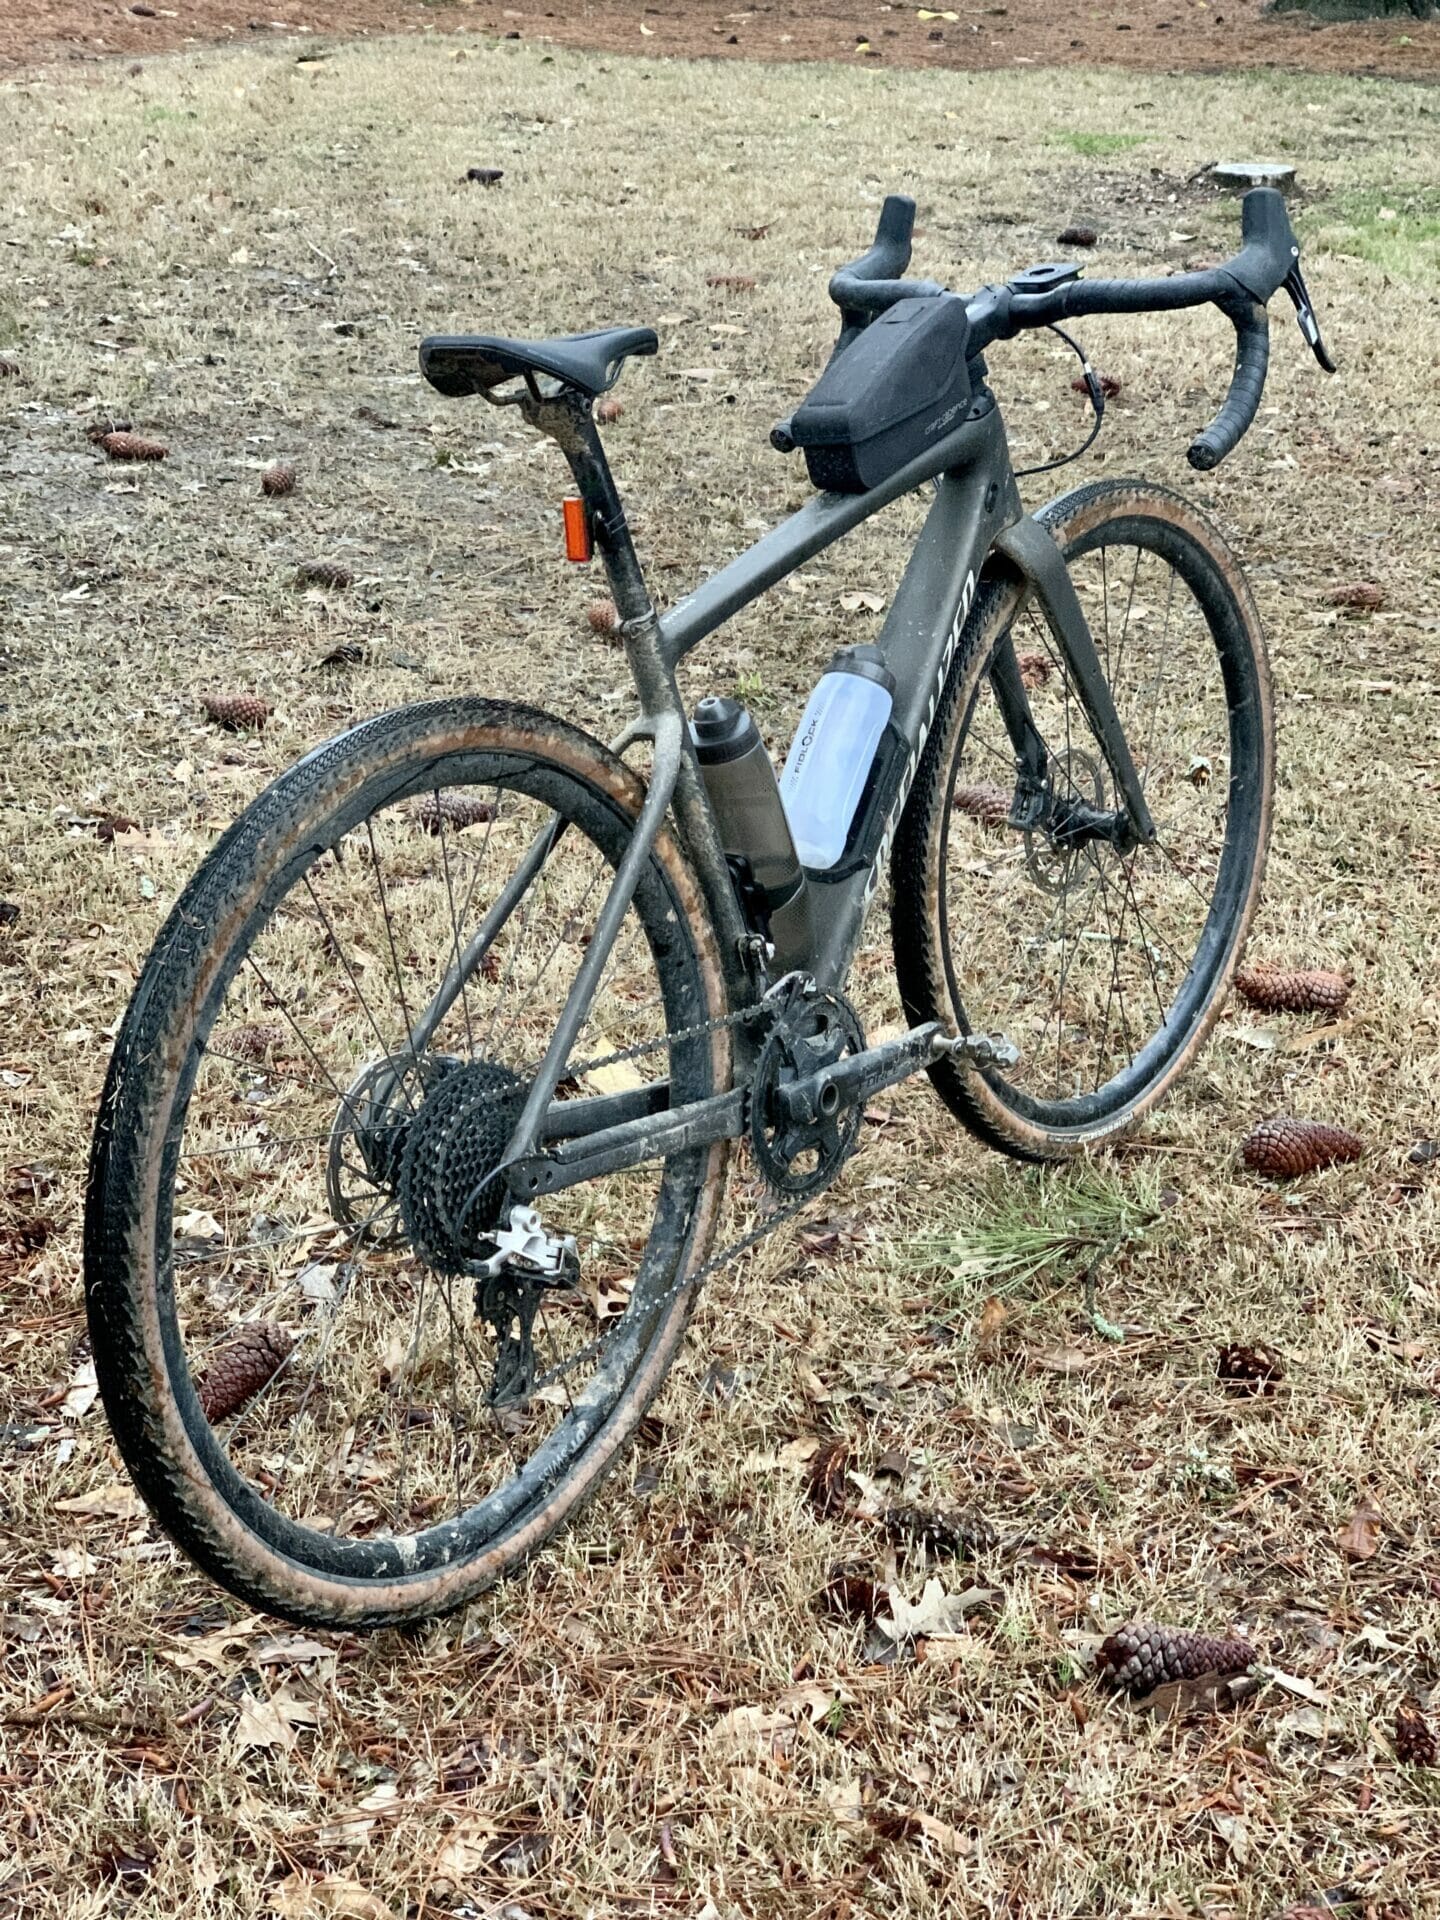 quaterview of gravel bike with craft cadence top tube bolt on bag on top tube